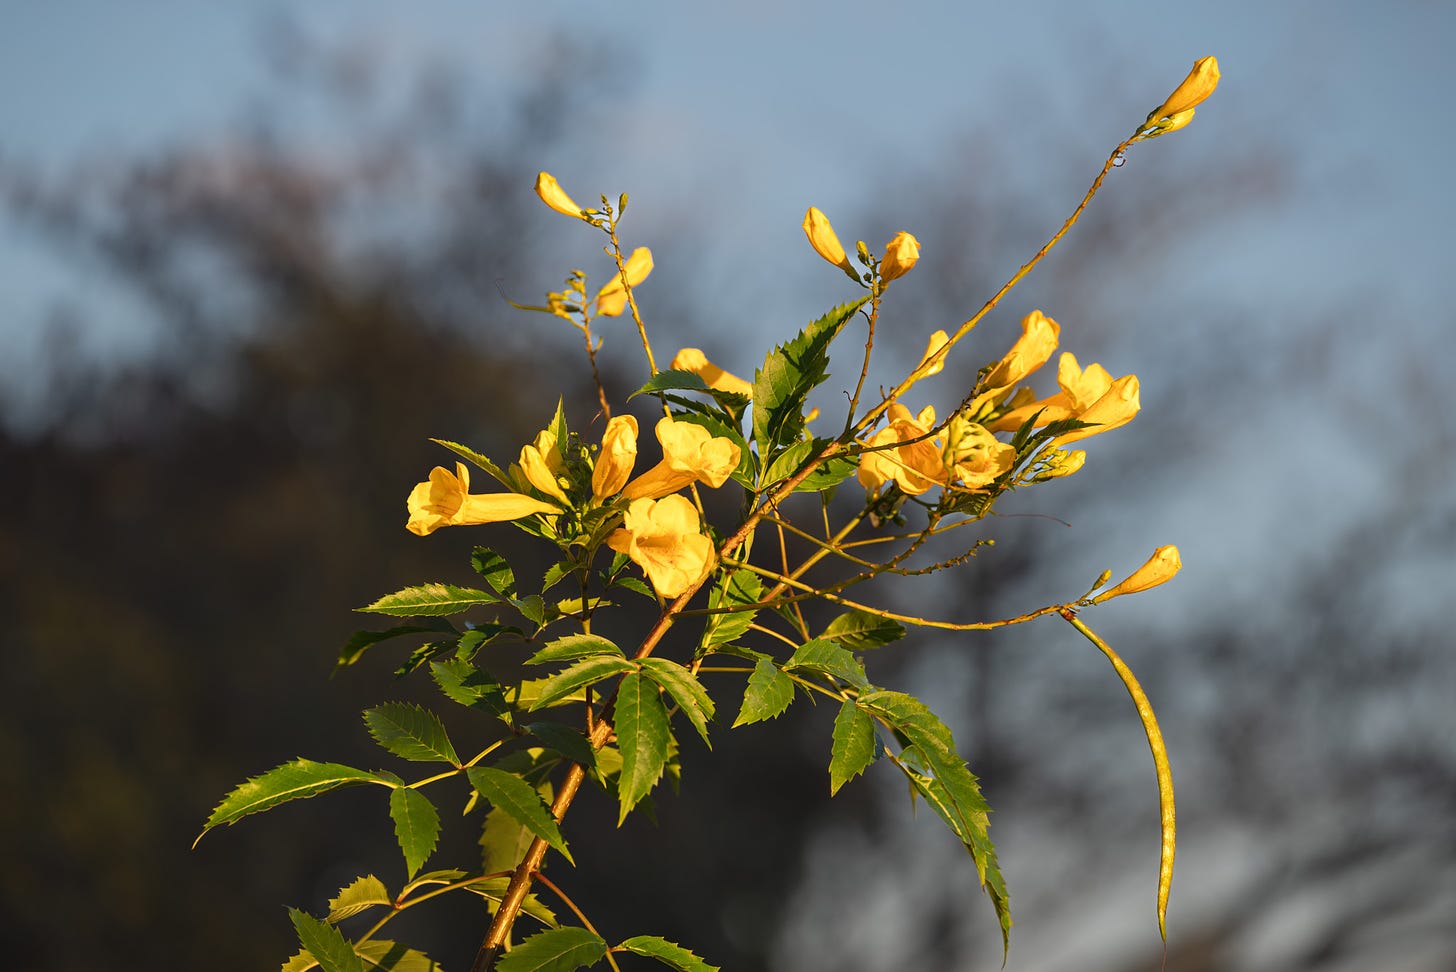 The yellow blooms of the Esperanza bush against a blurred backround of sky and tree branches